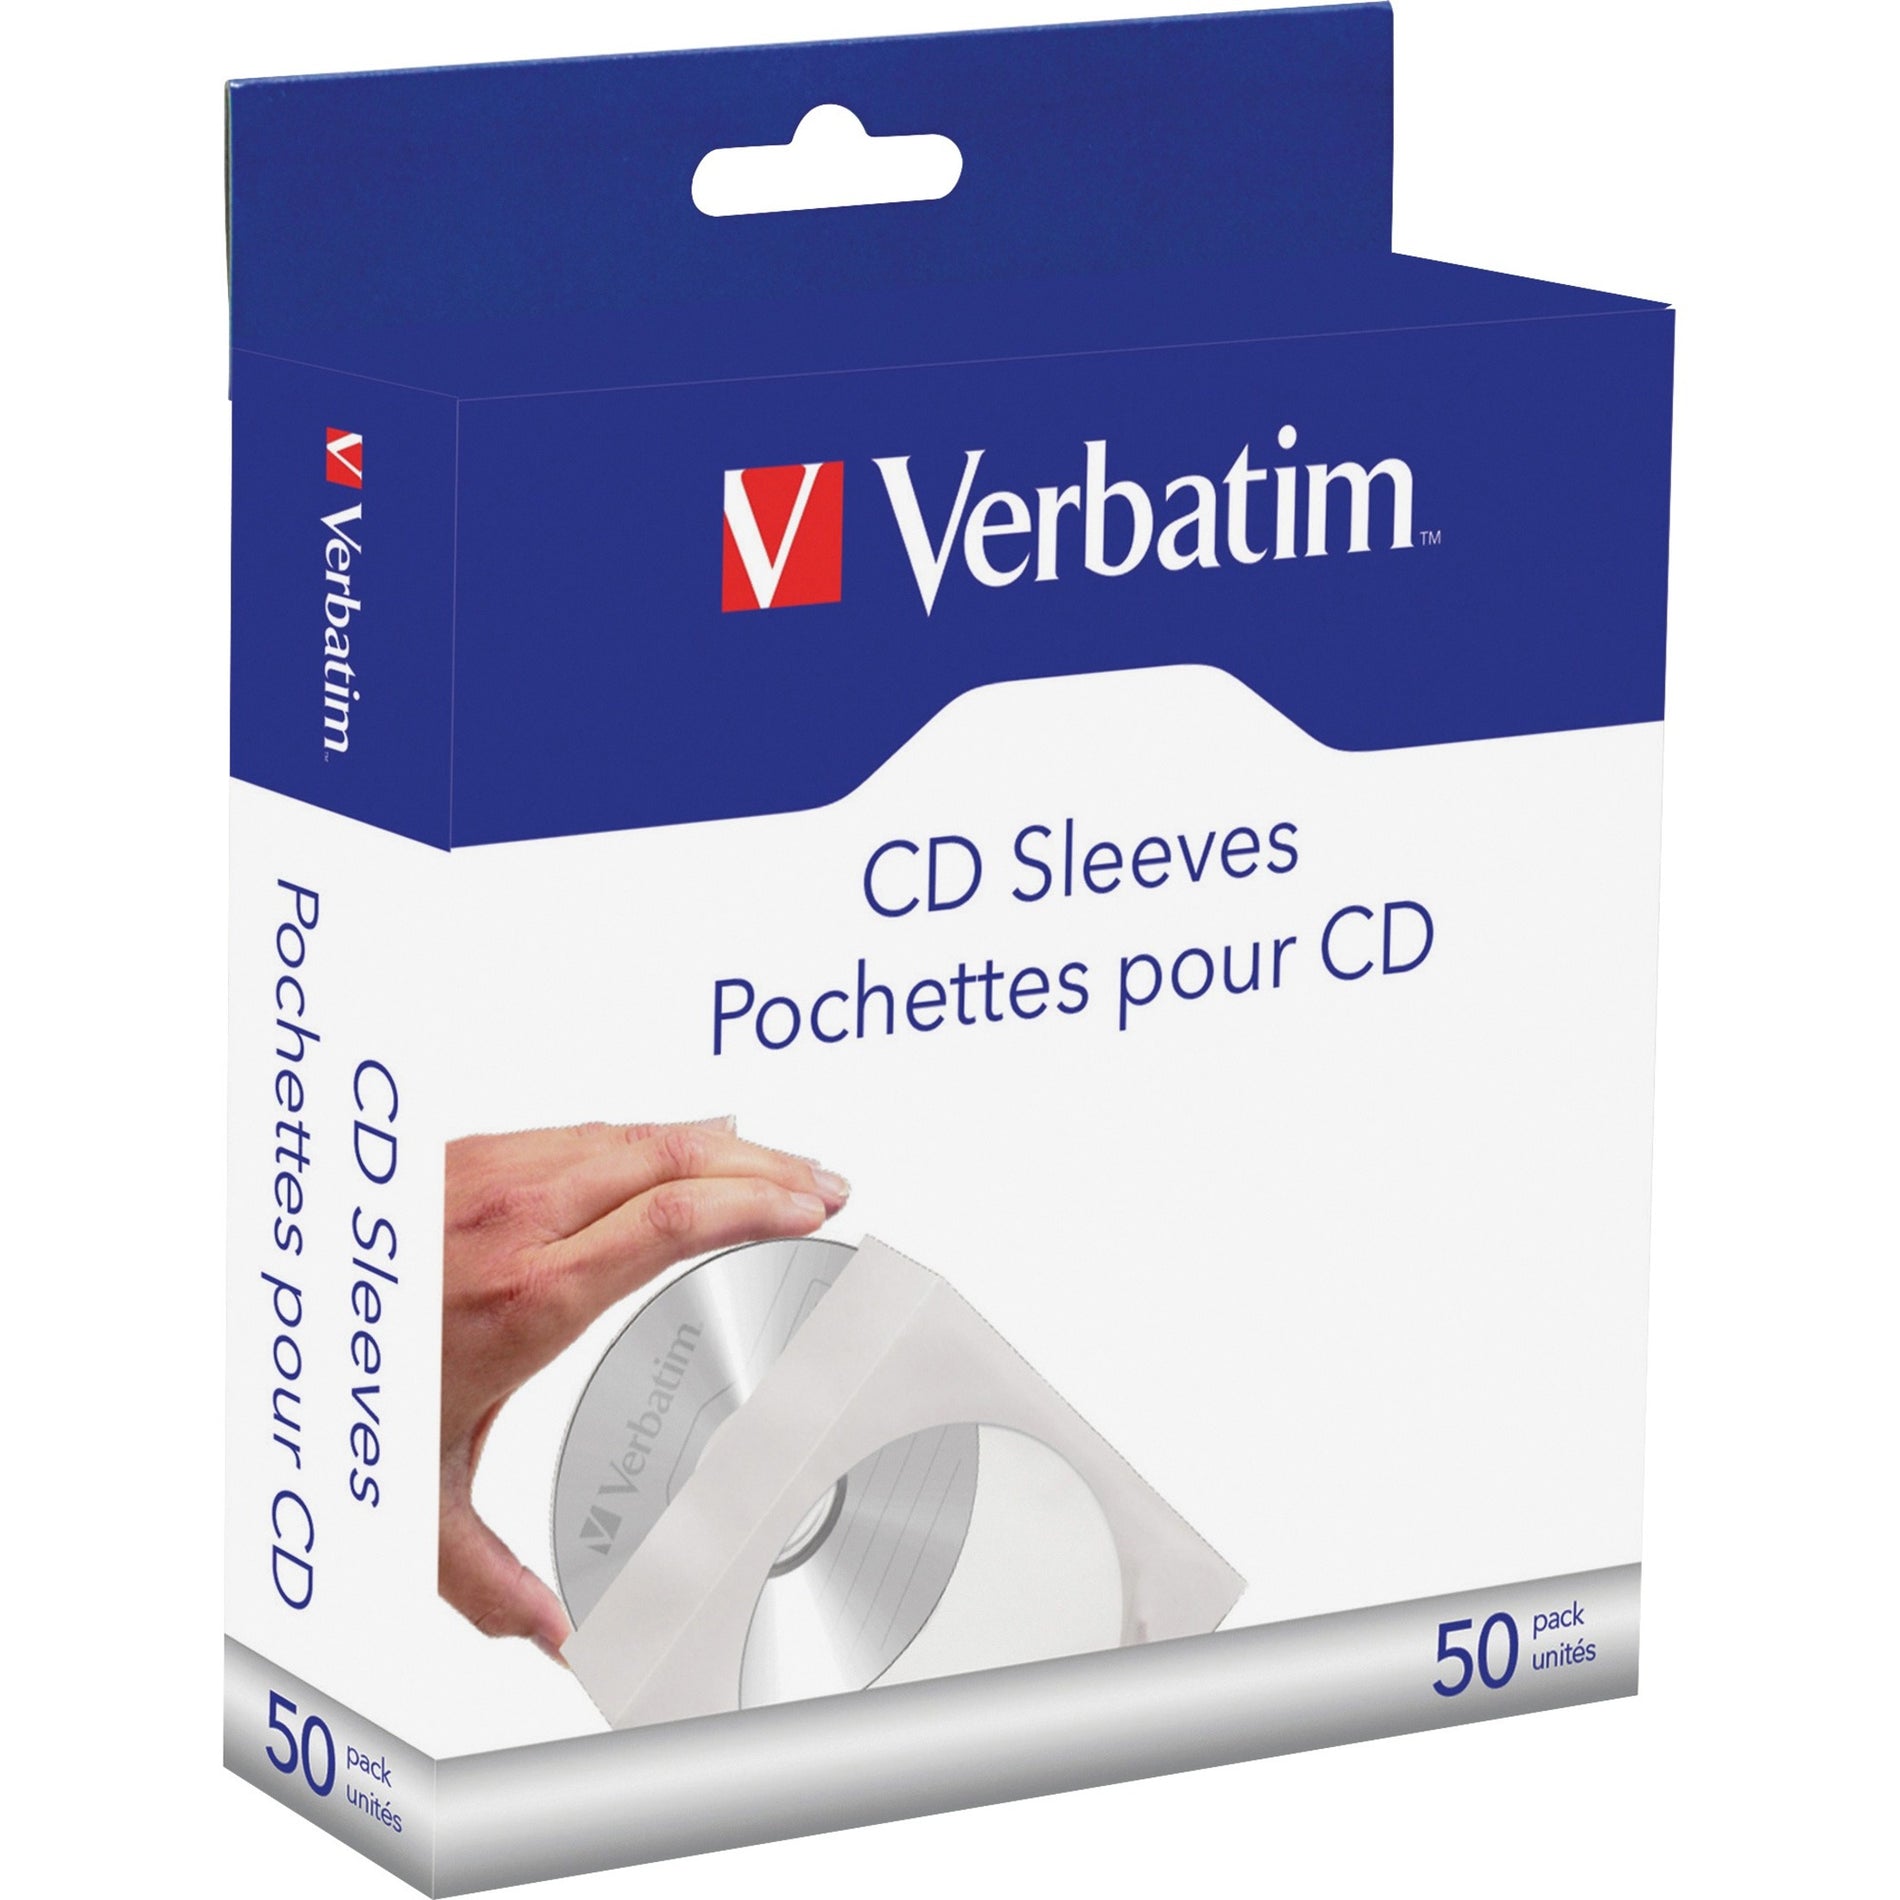 Verbatim 70126 CD/DVD Paper Sleeves with Clear Window - 50pk Box, Organize and Protect Your Discs